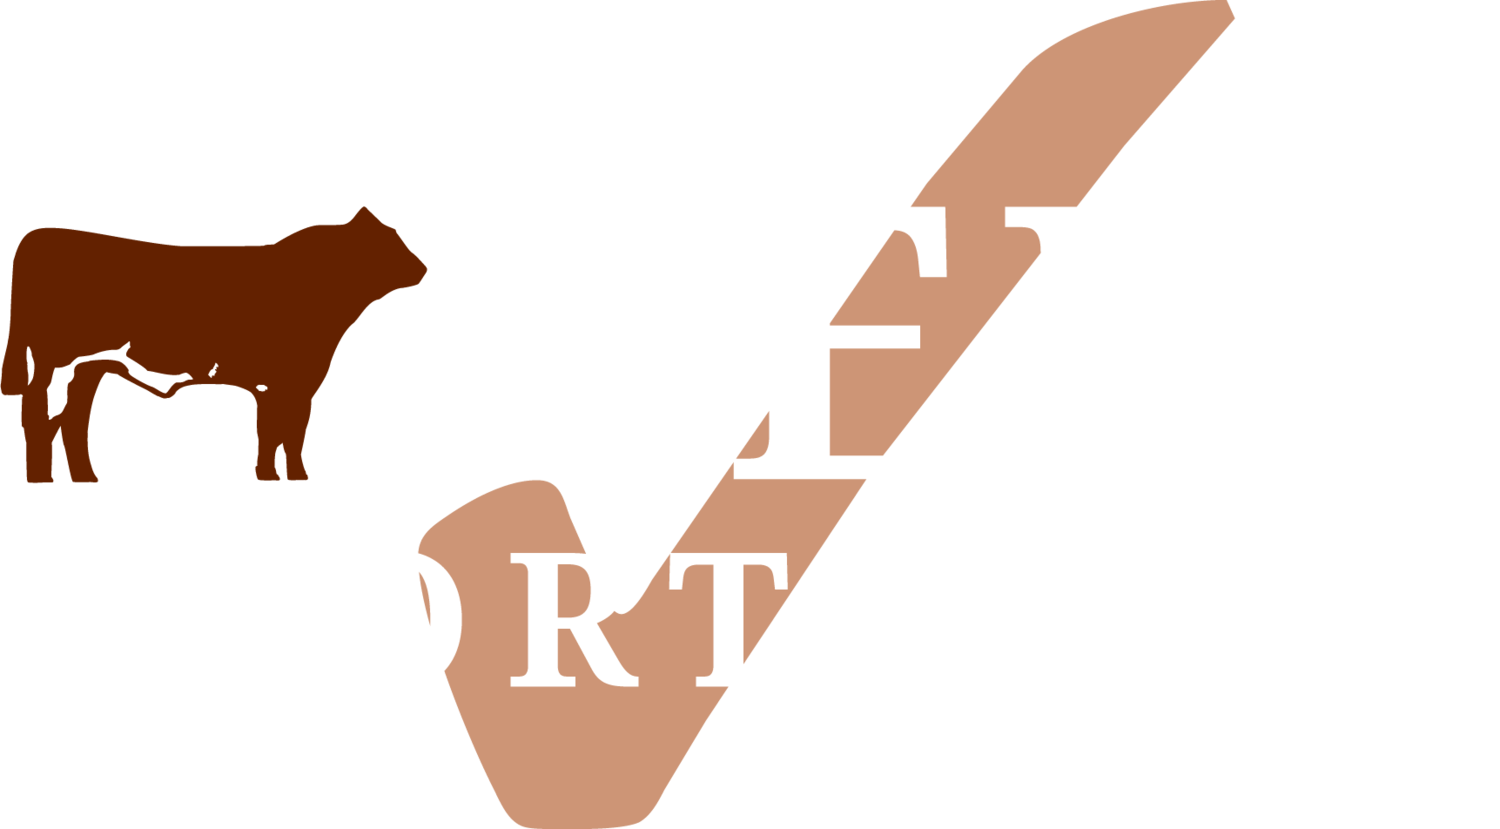 The Beef Shorthorn Cattle Society